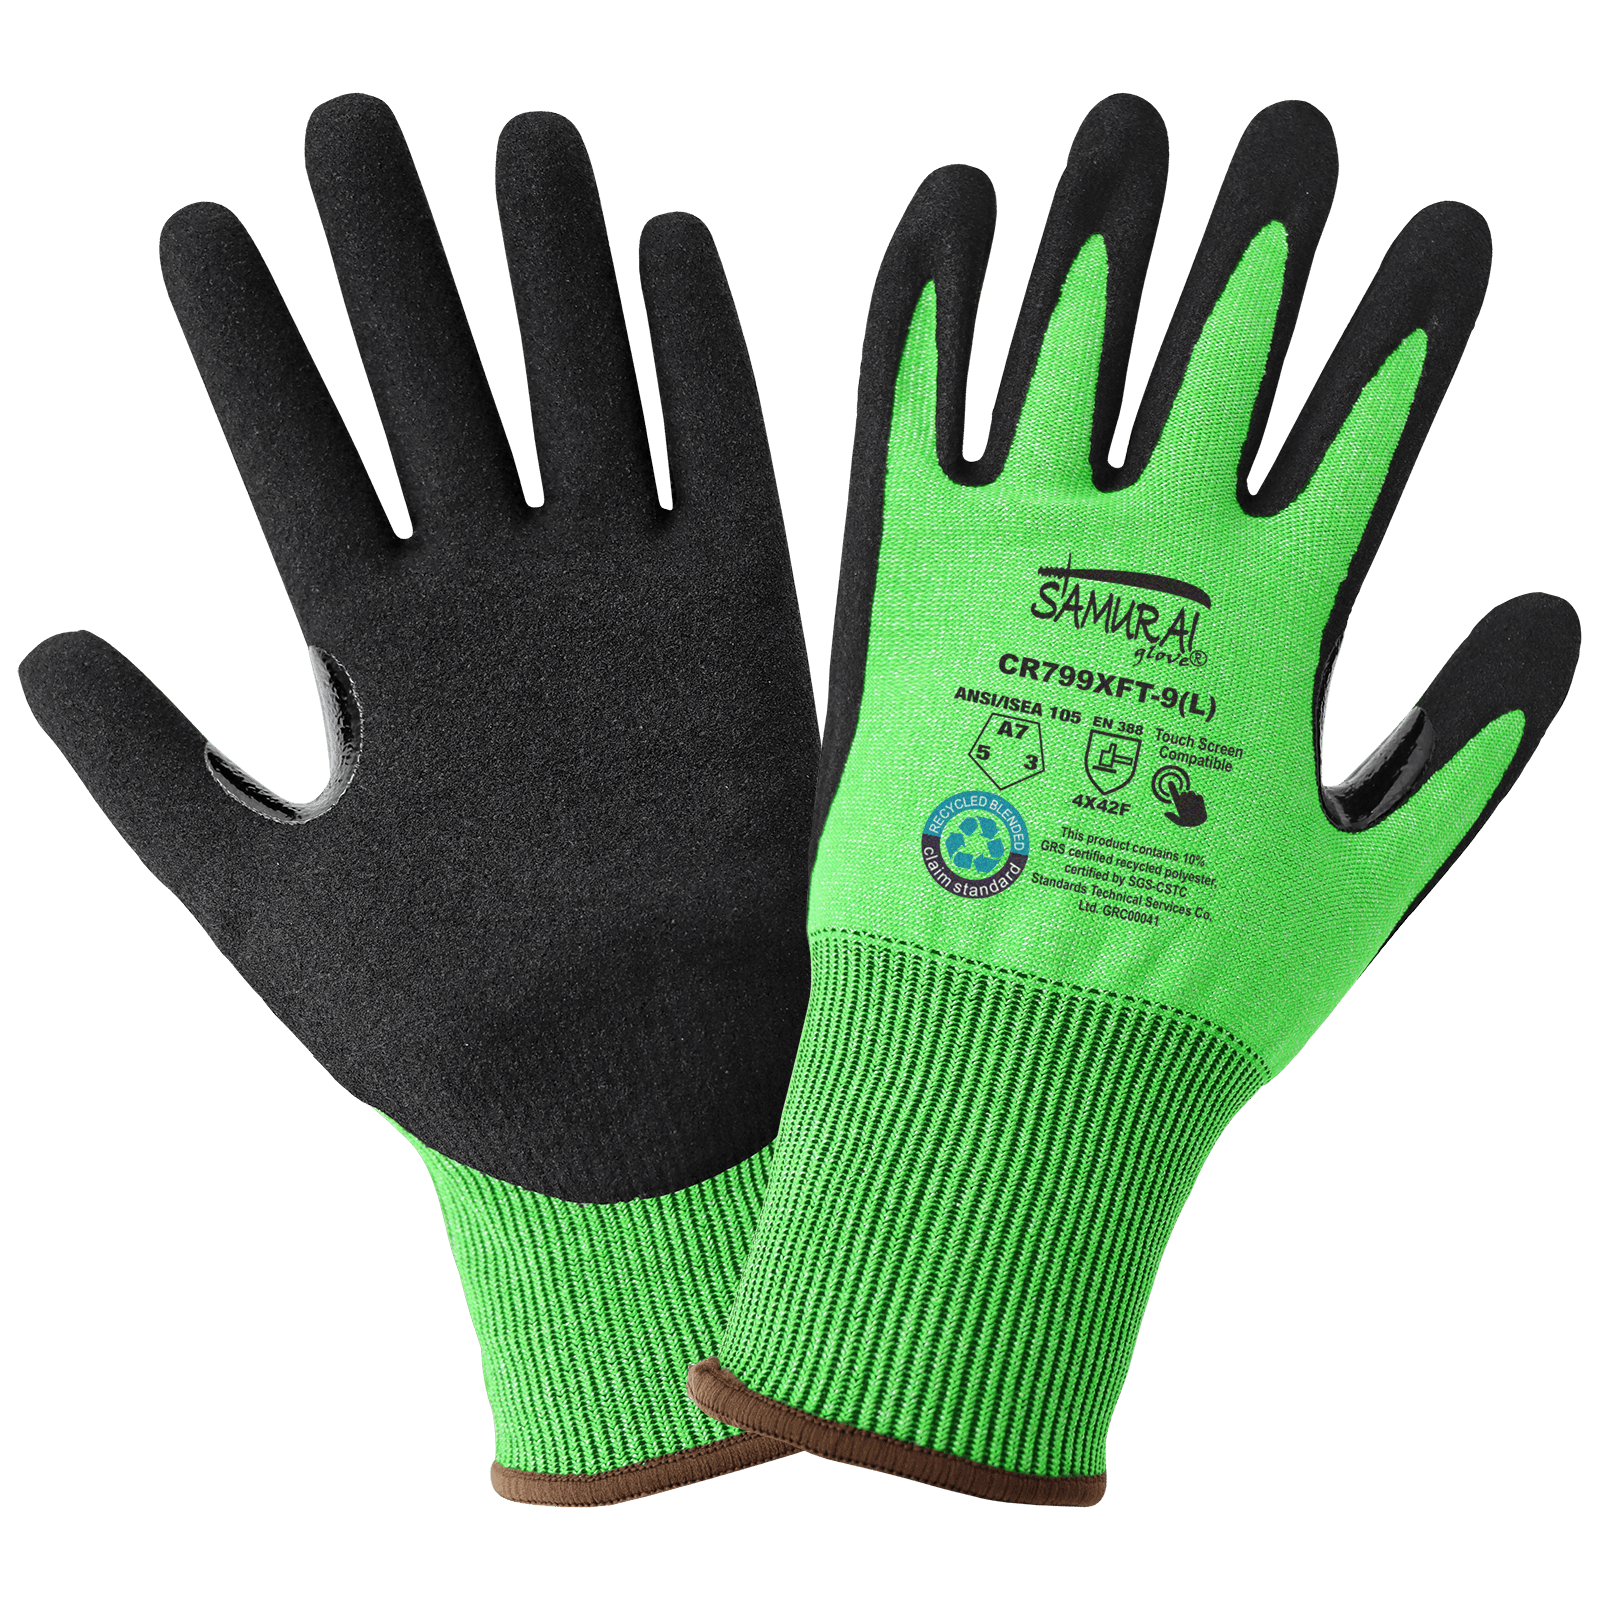 Samurai Glove® Hi-Viz Nitrile Coated rPET Recycled Cut Resistant Gloves with Touch Screen Fingers - Spill Control